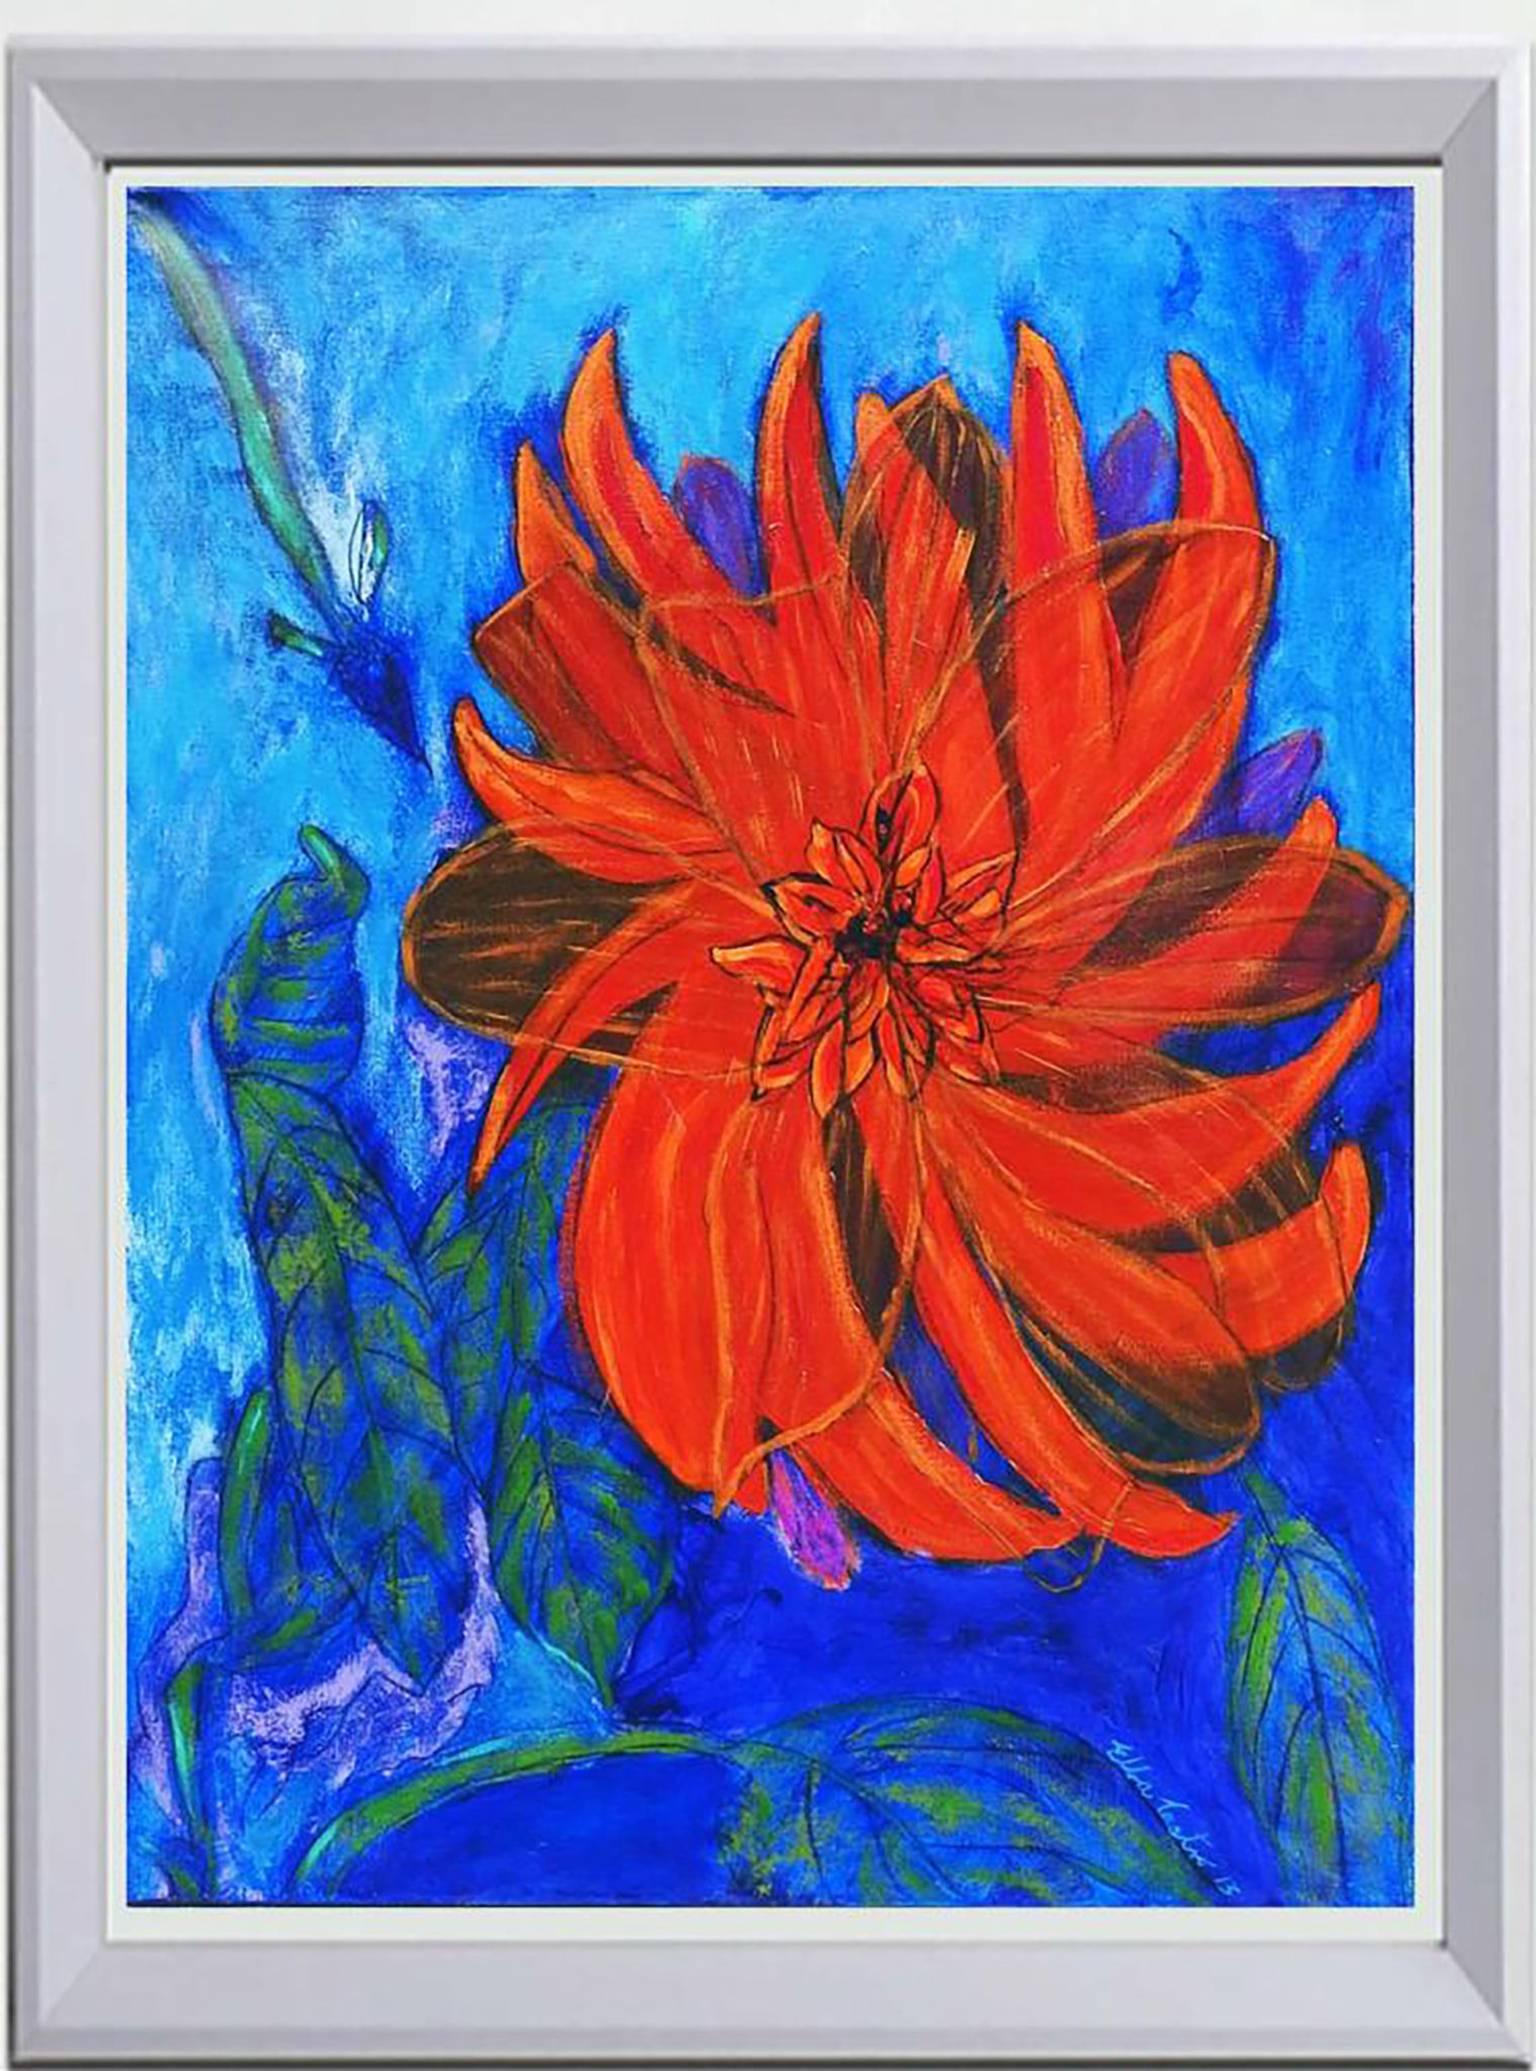 Gorgeous Large Original acrylic on canvas painting by popular Mexican artist Castro Calderon entitled "Dahlia".  Modern Impressionistic depiction of a Dahlia flower,  which is a genus of bushy, tuberous, herbaceous perennial plants native to Mexico.